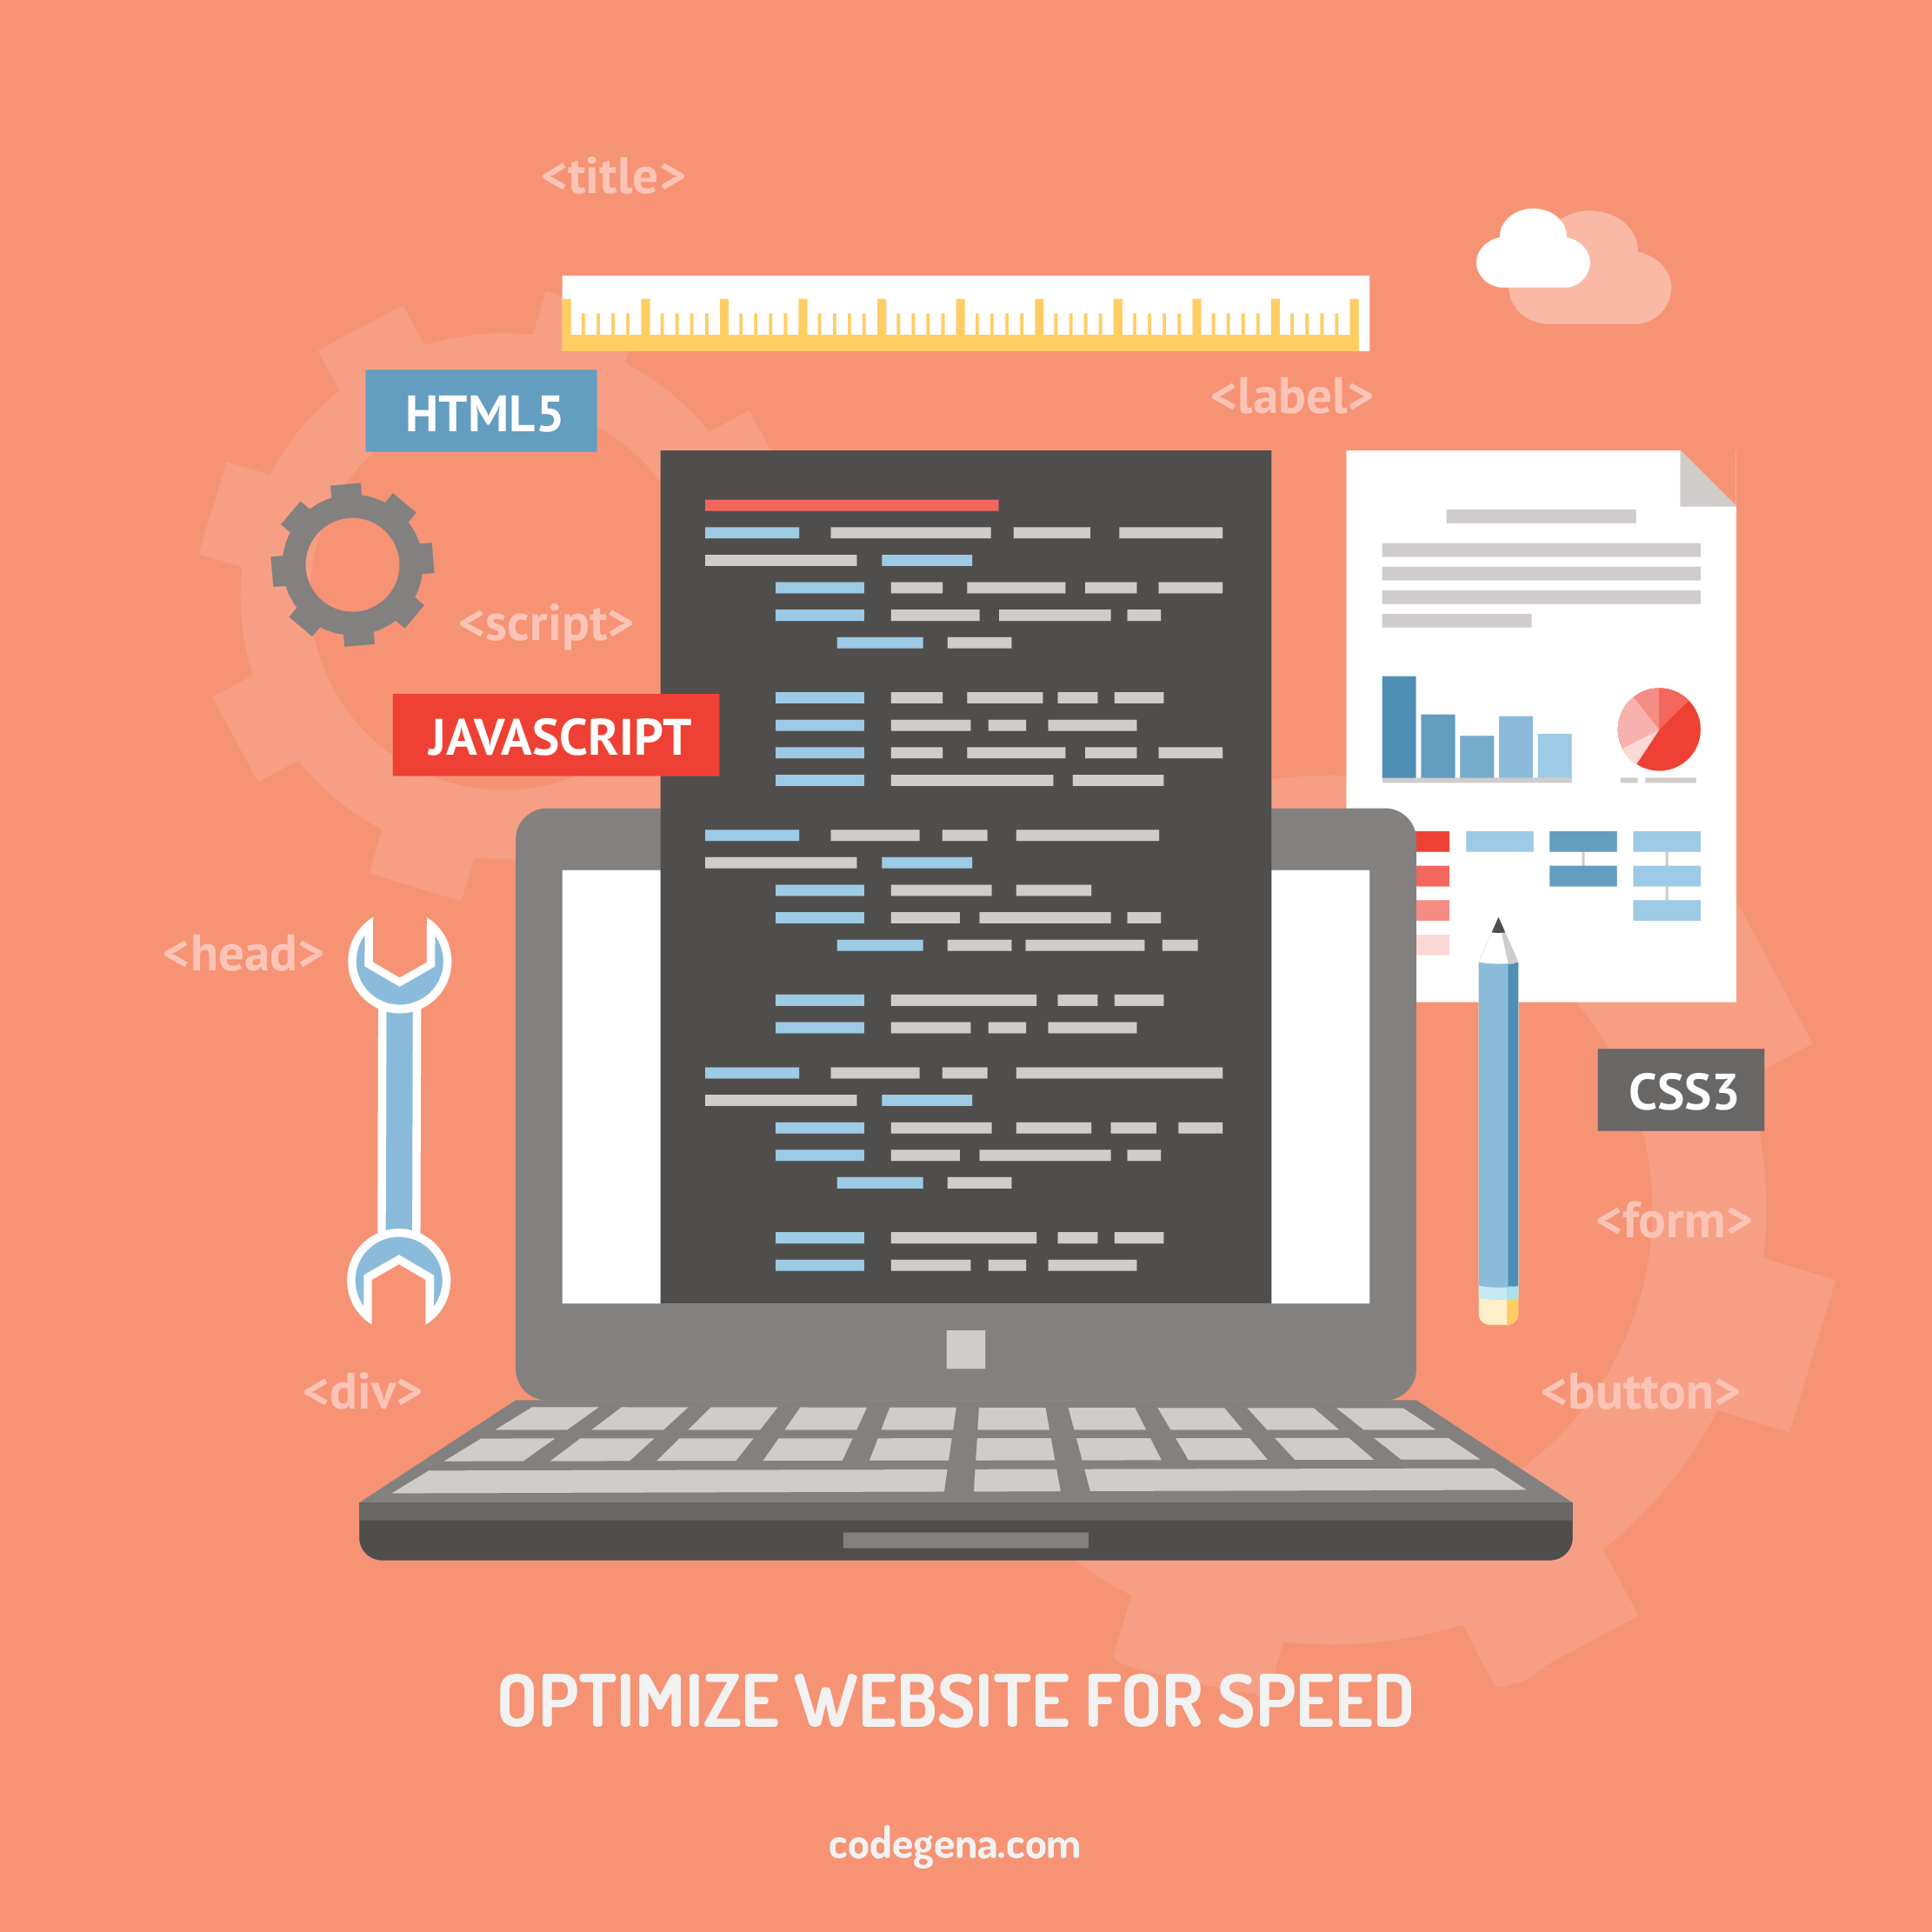 pagespeed insights optimize images